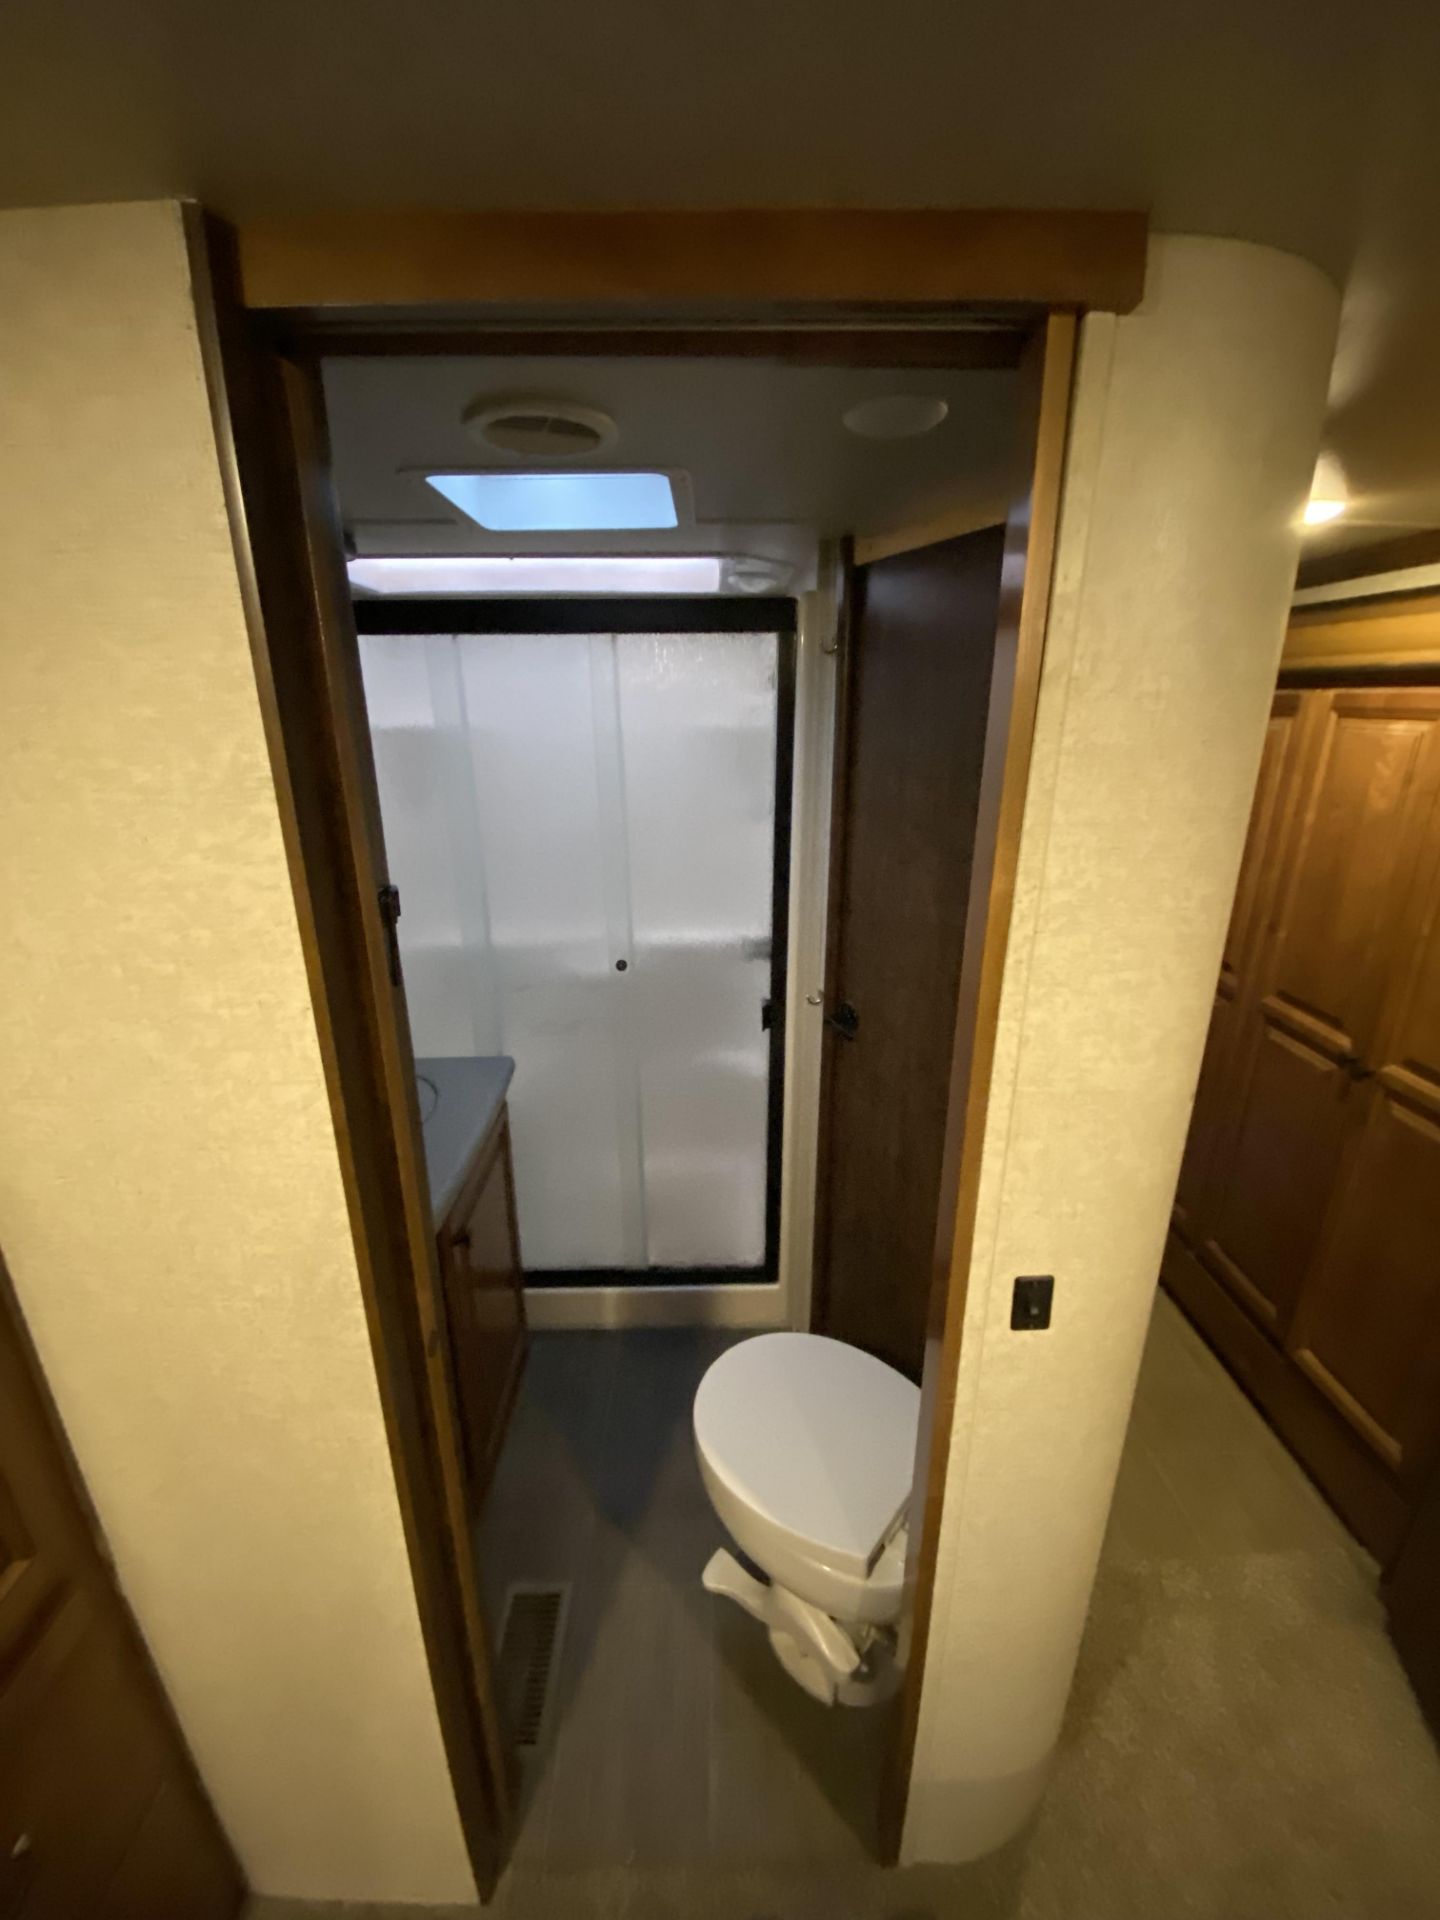 2018 Big Country 5th Wheel Camper Model 3965DSS w/4 Slide Outs - SEE VIDEO & DESCRIPTION - Image 14 of 38